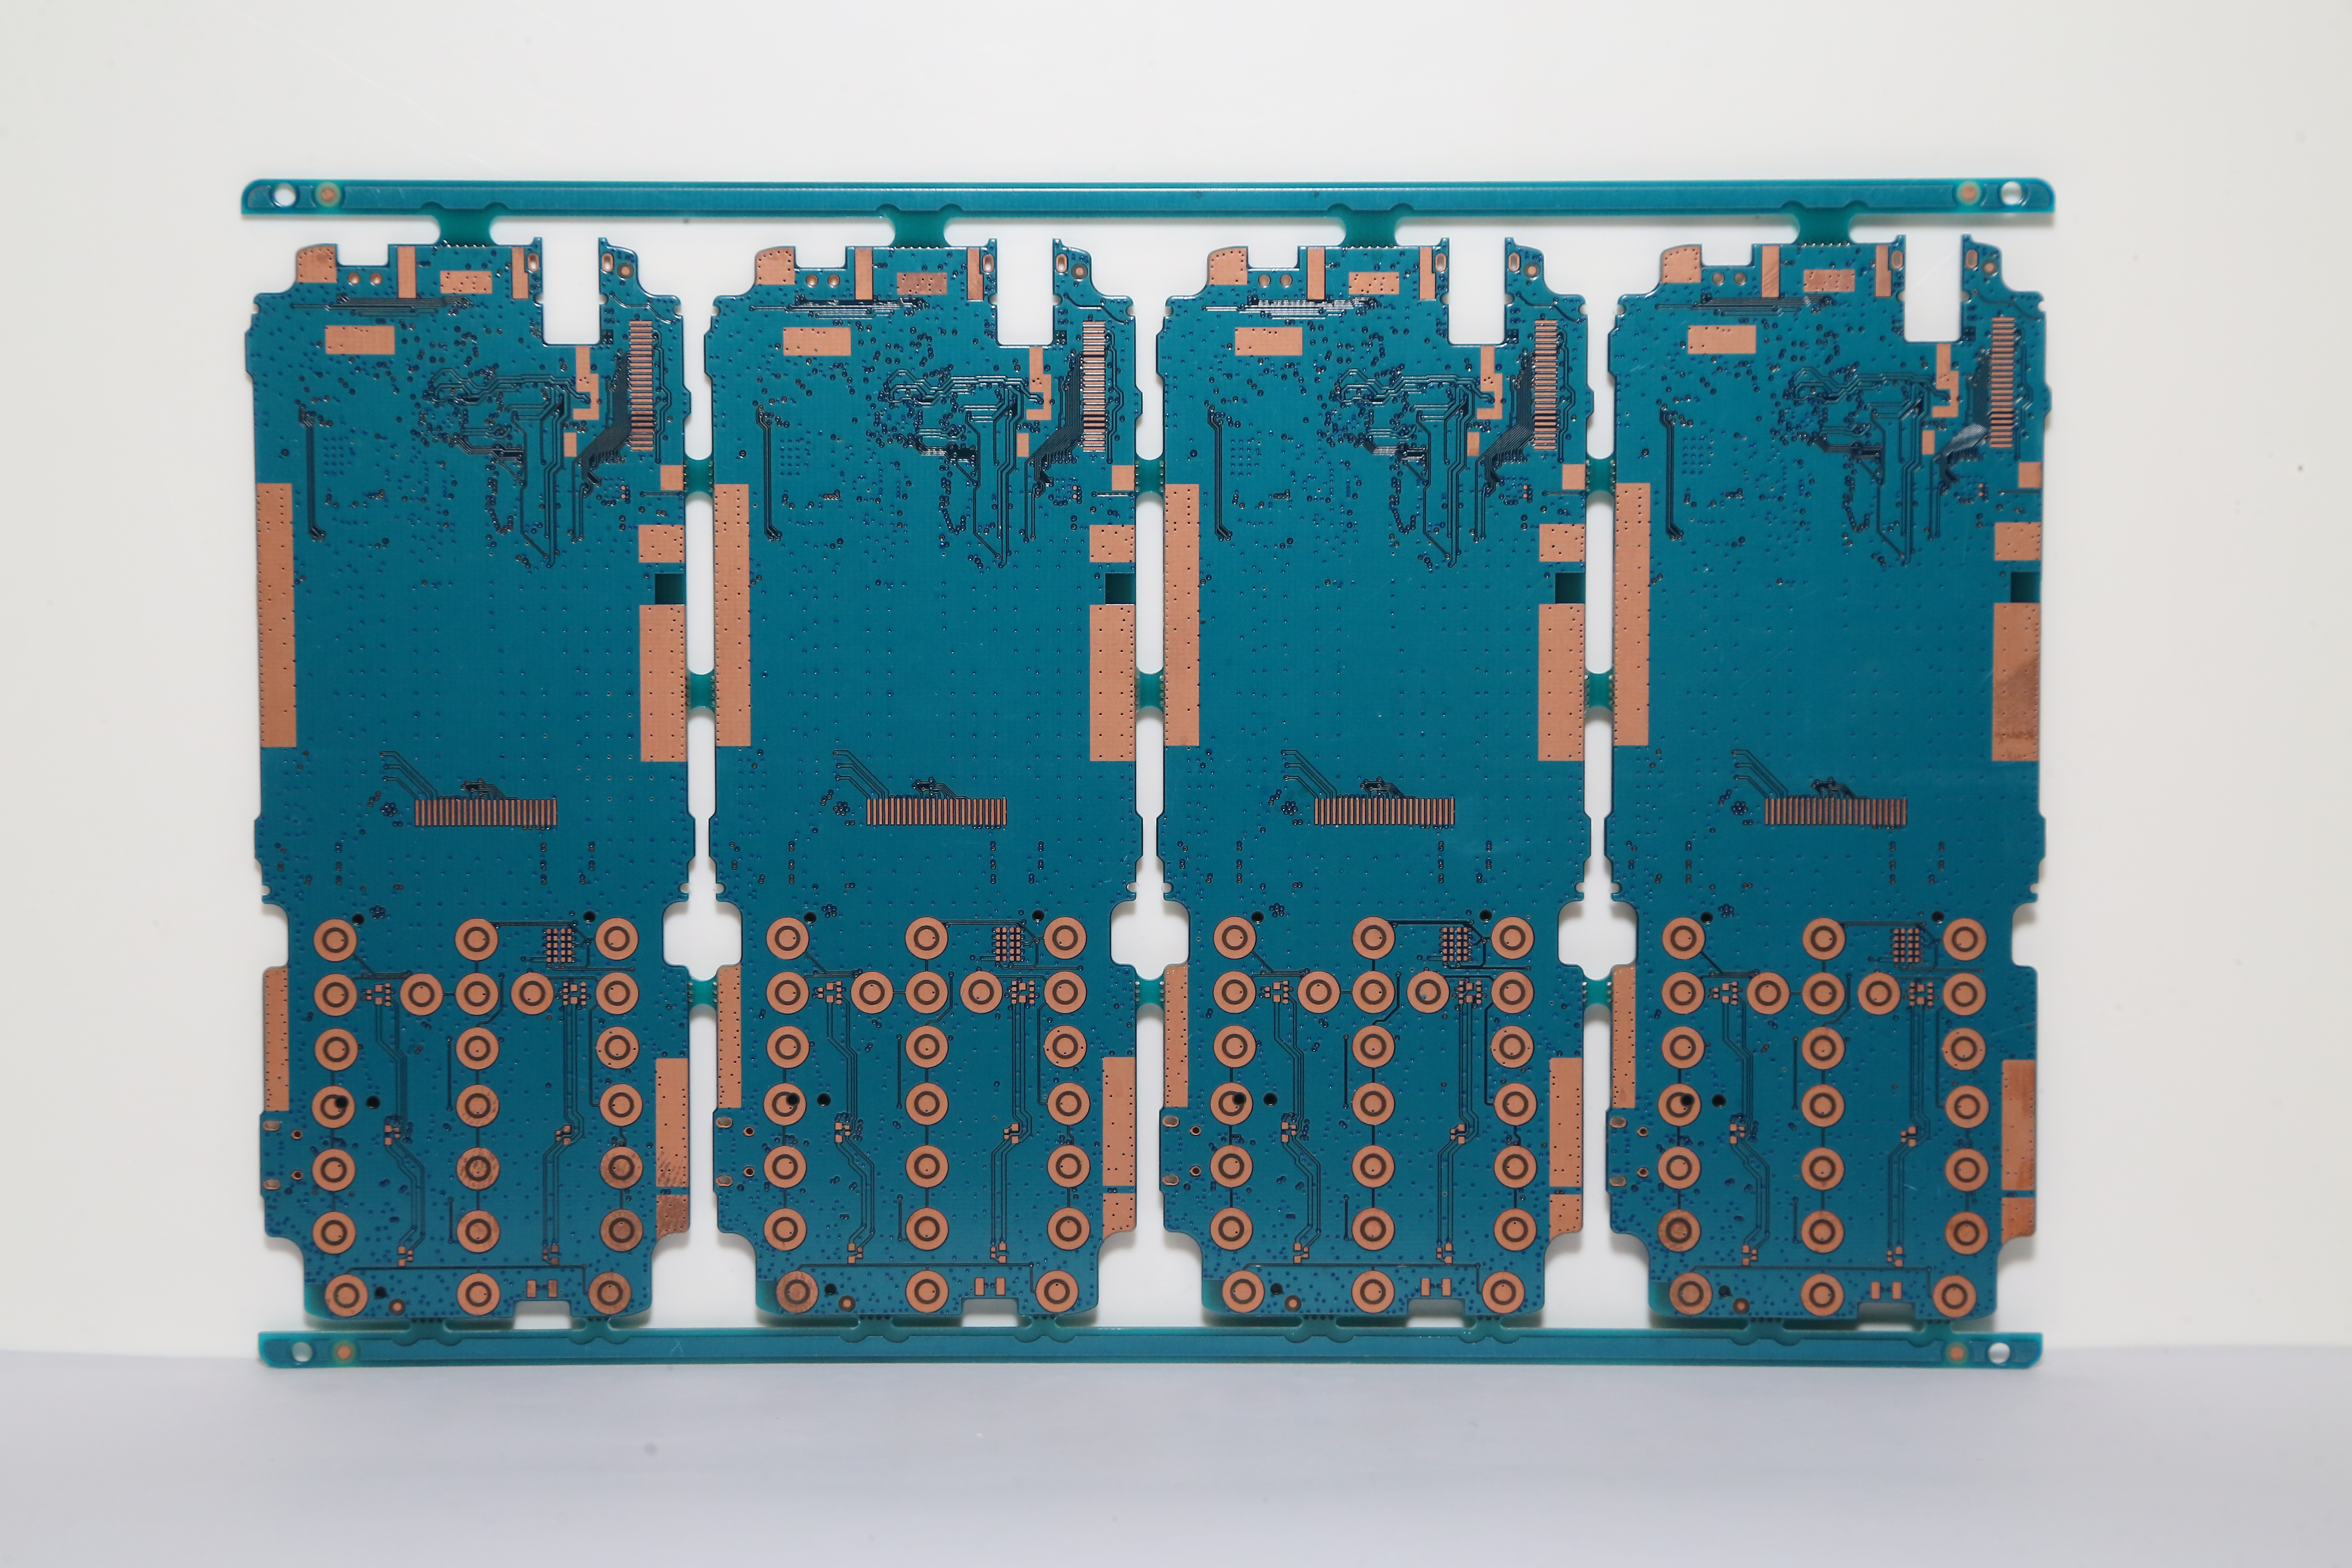 https://www.shutterstock.com/image-photo/industrial-factory-product-pcb-manufacturing-board-1842775150